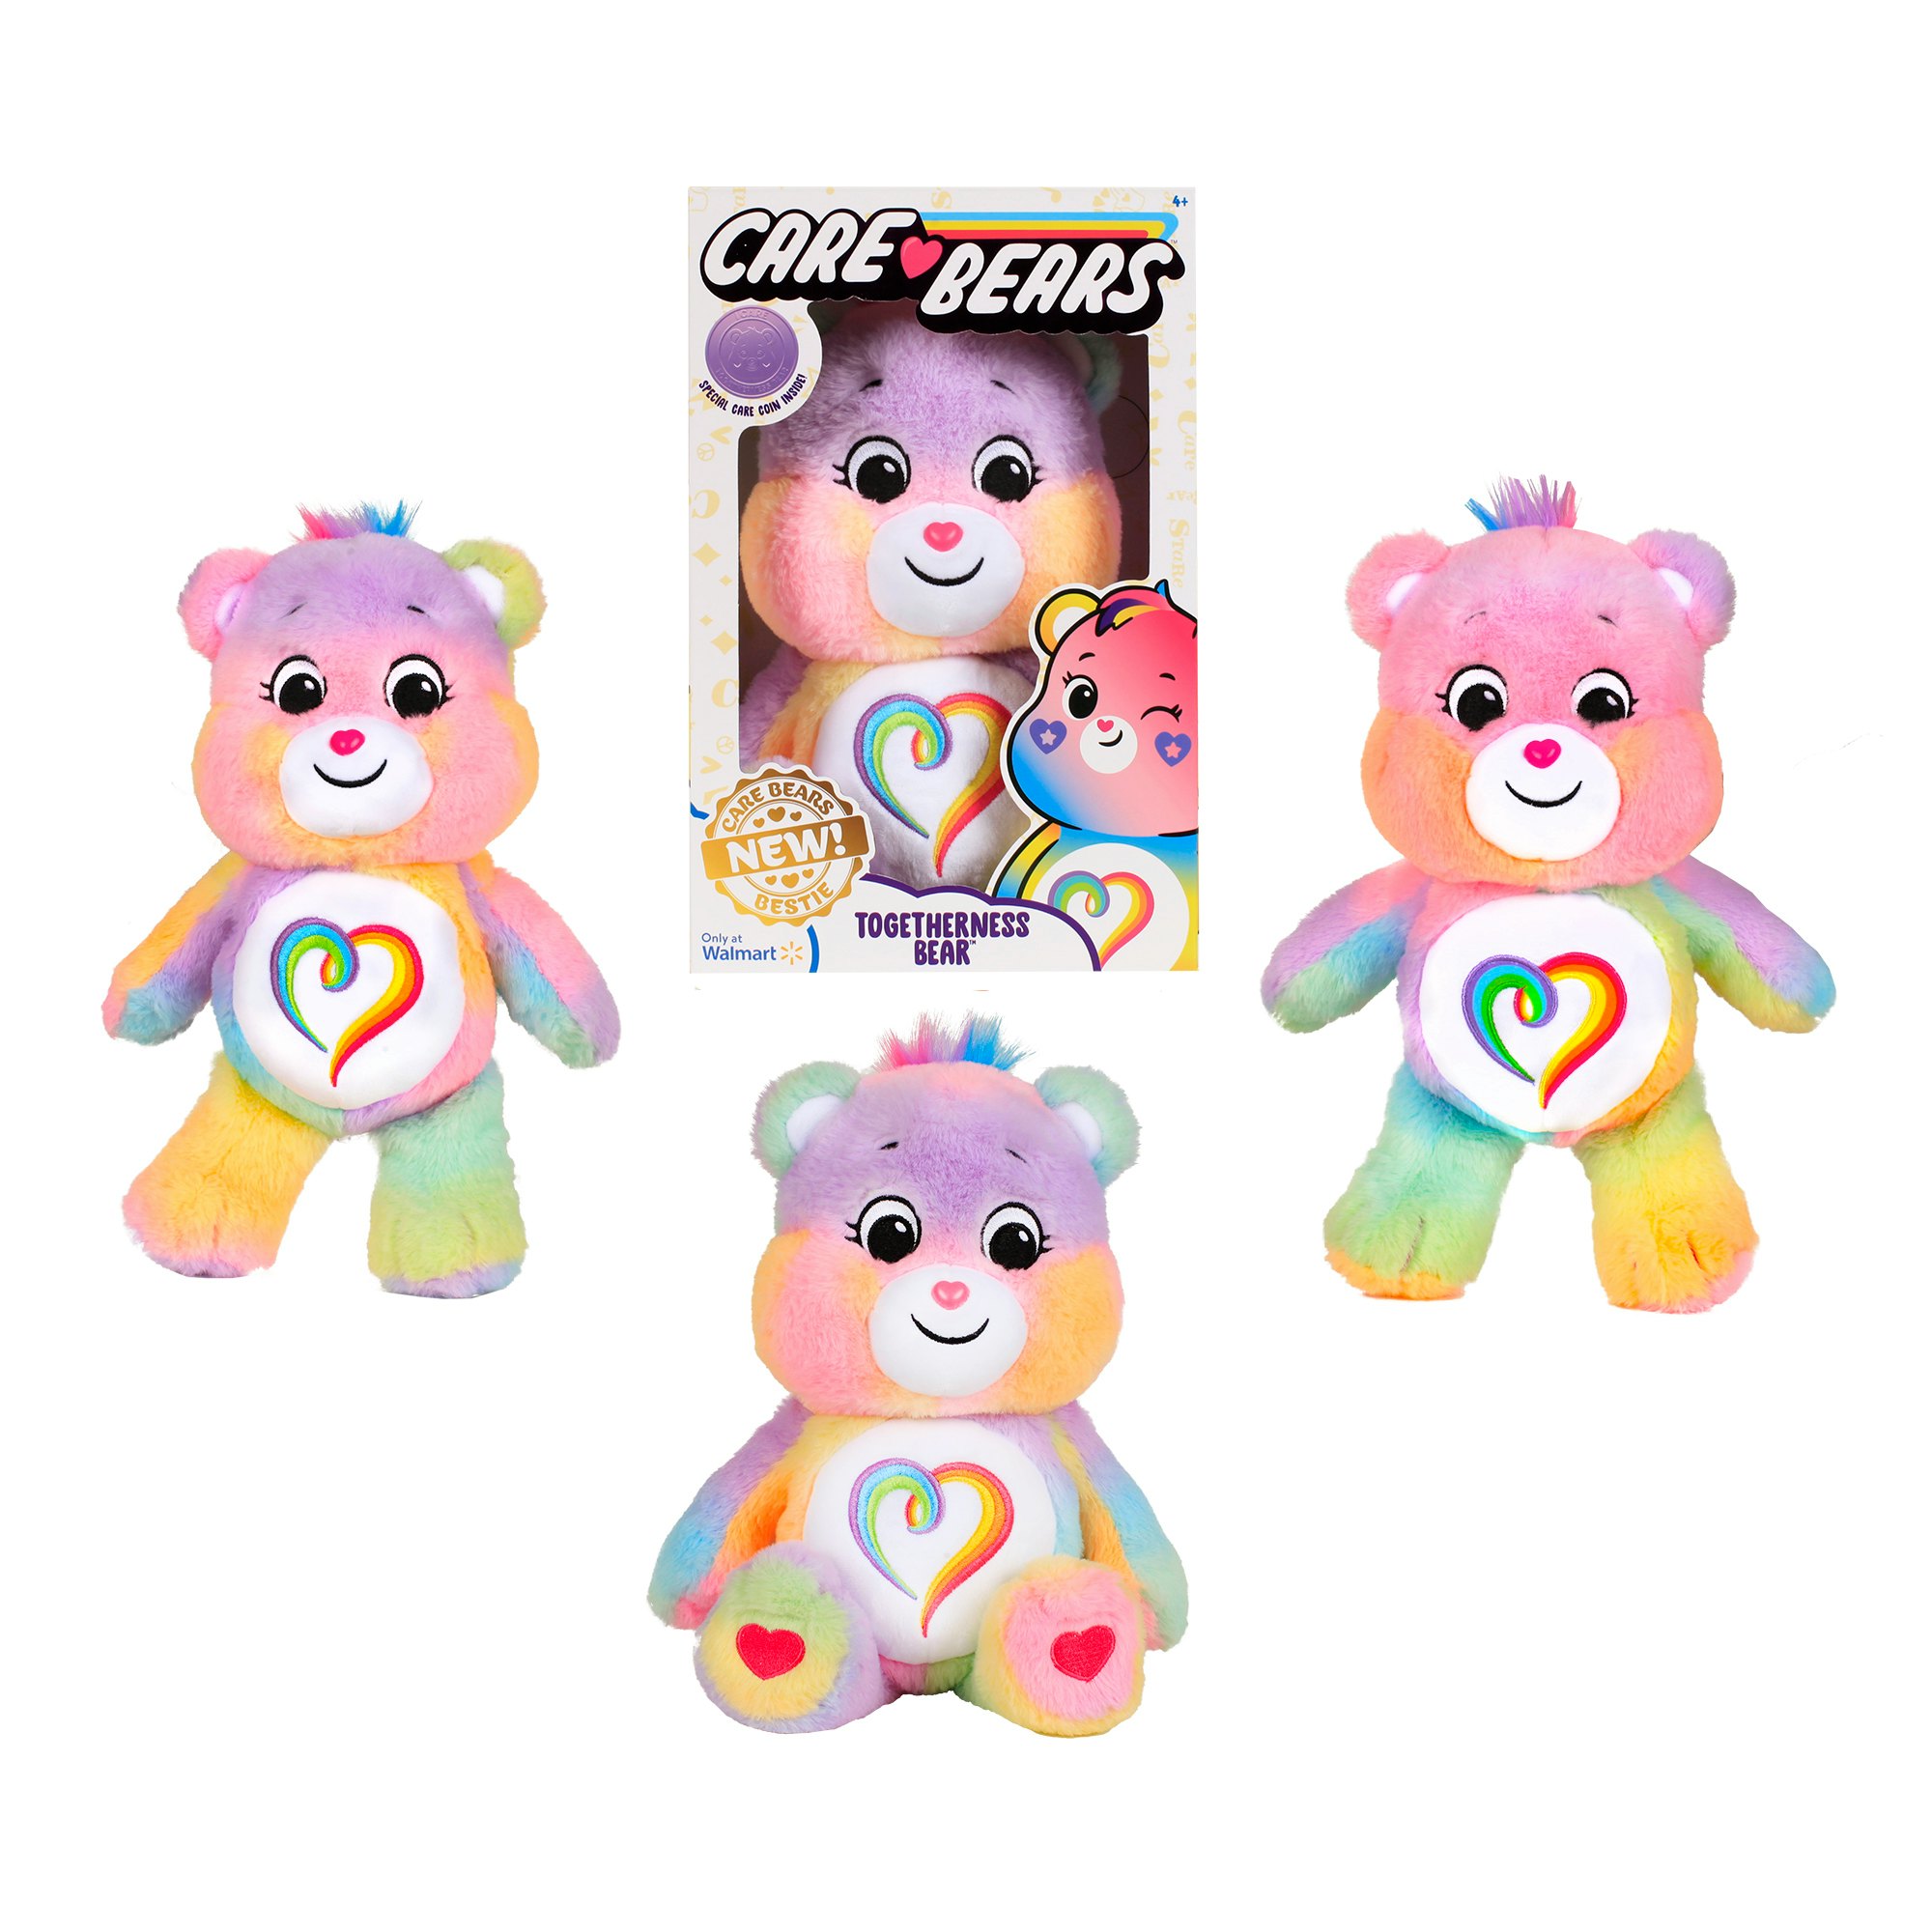 The New Care Bear, Togetherness Bear, Is All About Love